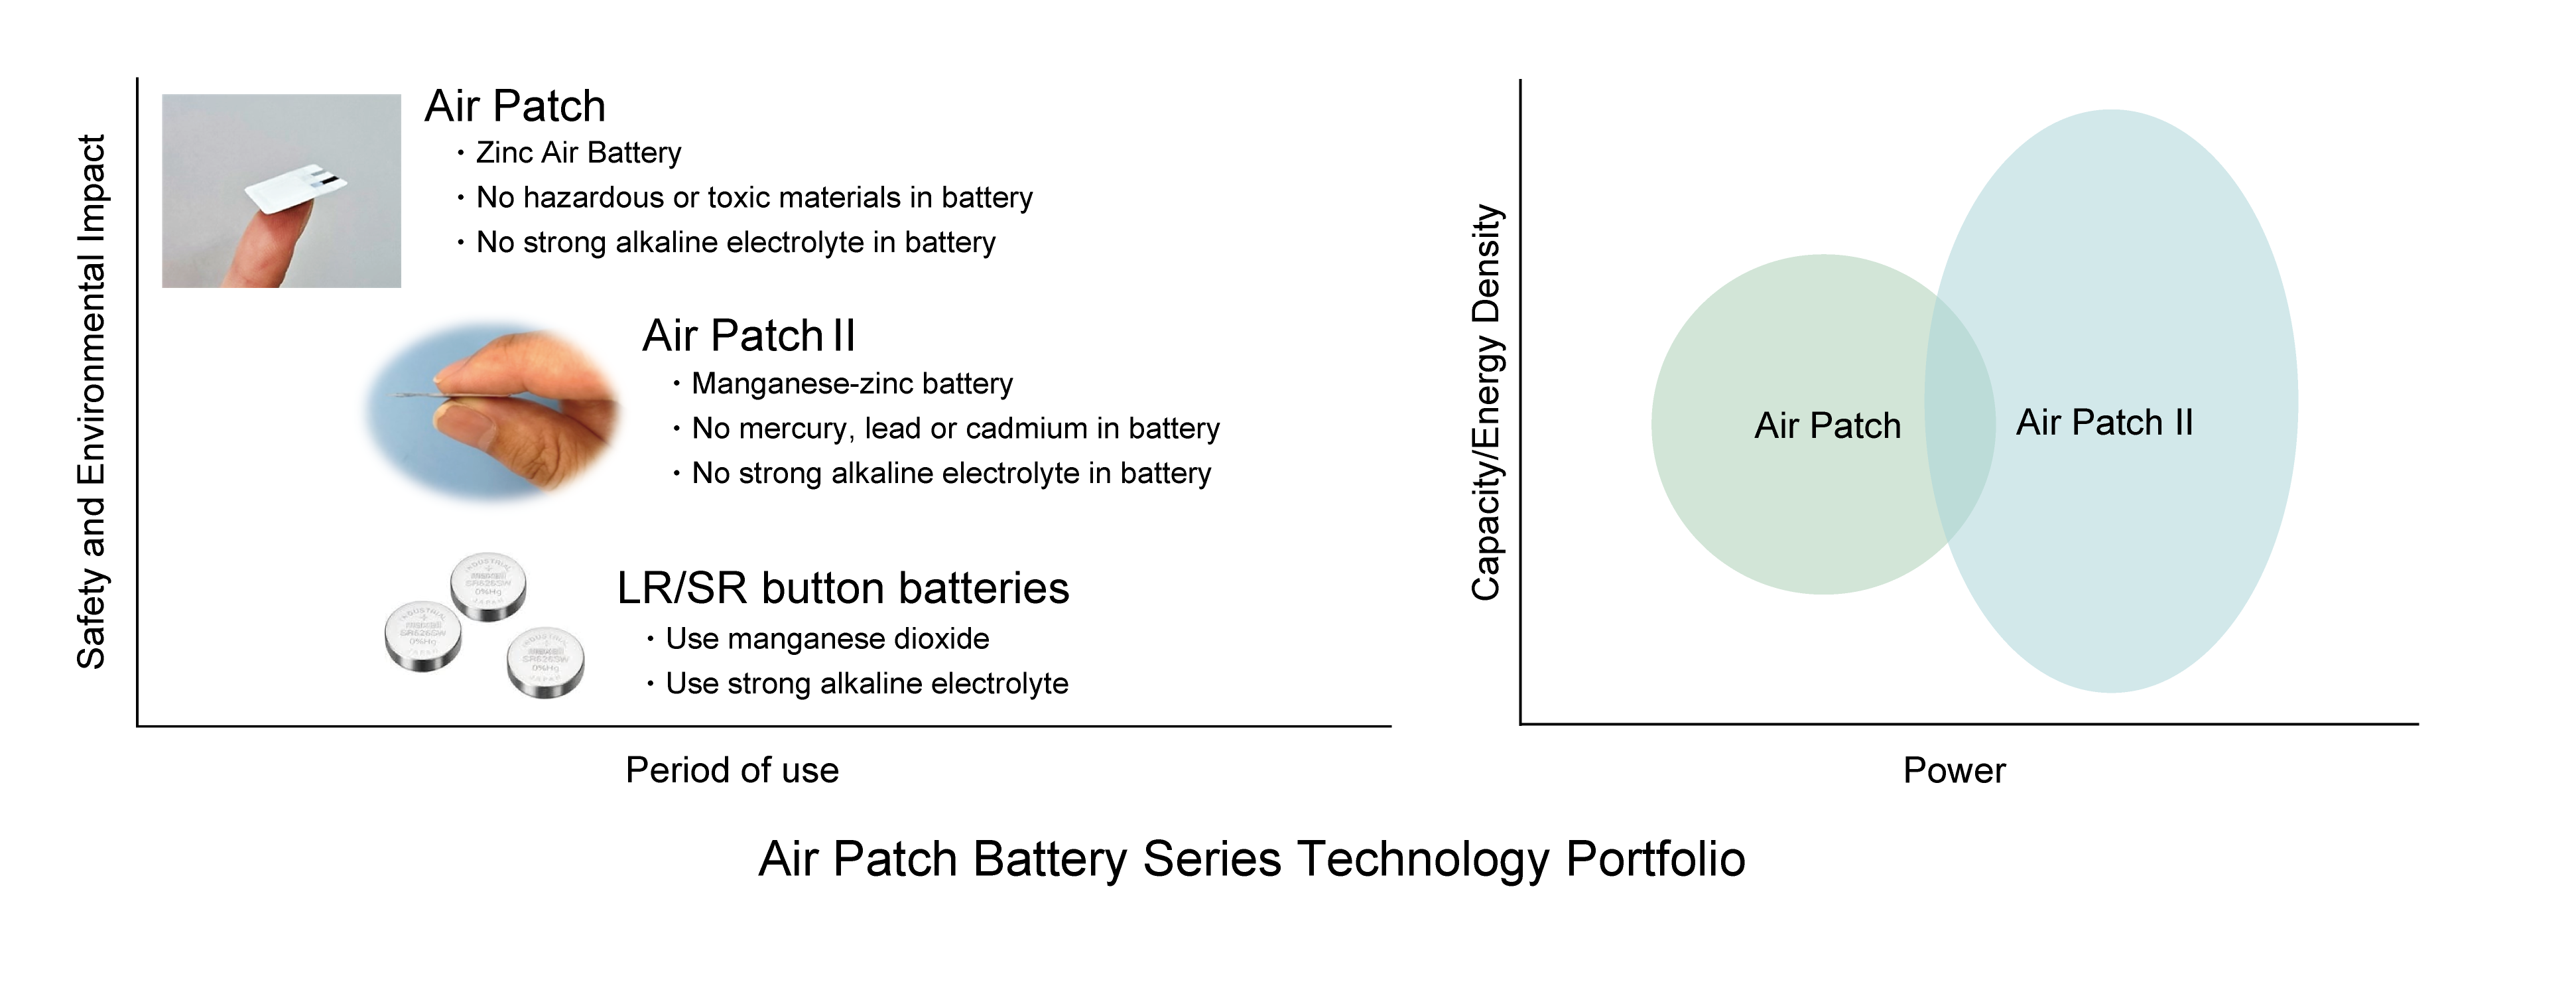 Air Patch Battery technology portfolio for “Air Patch” series
